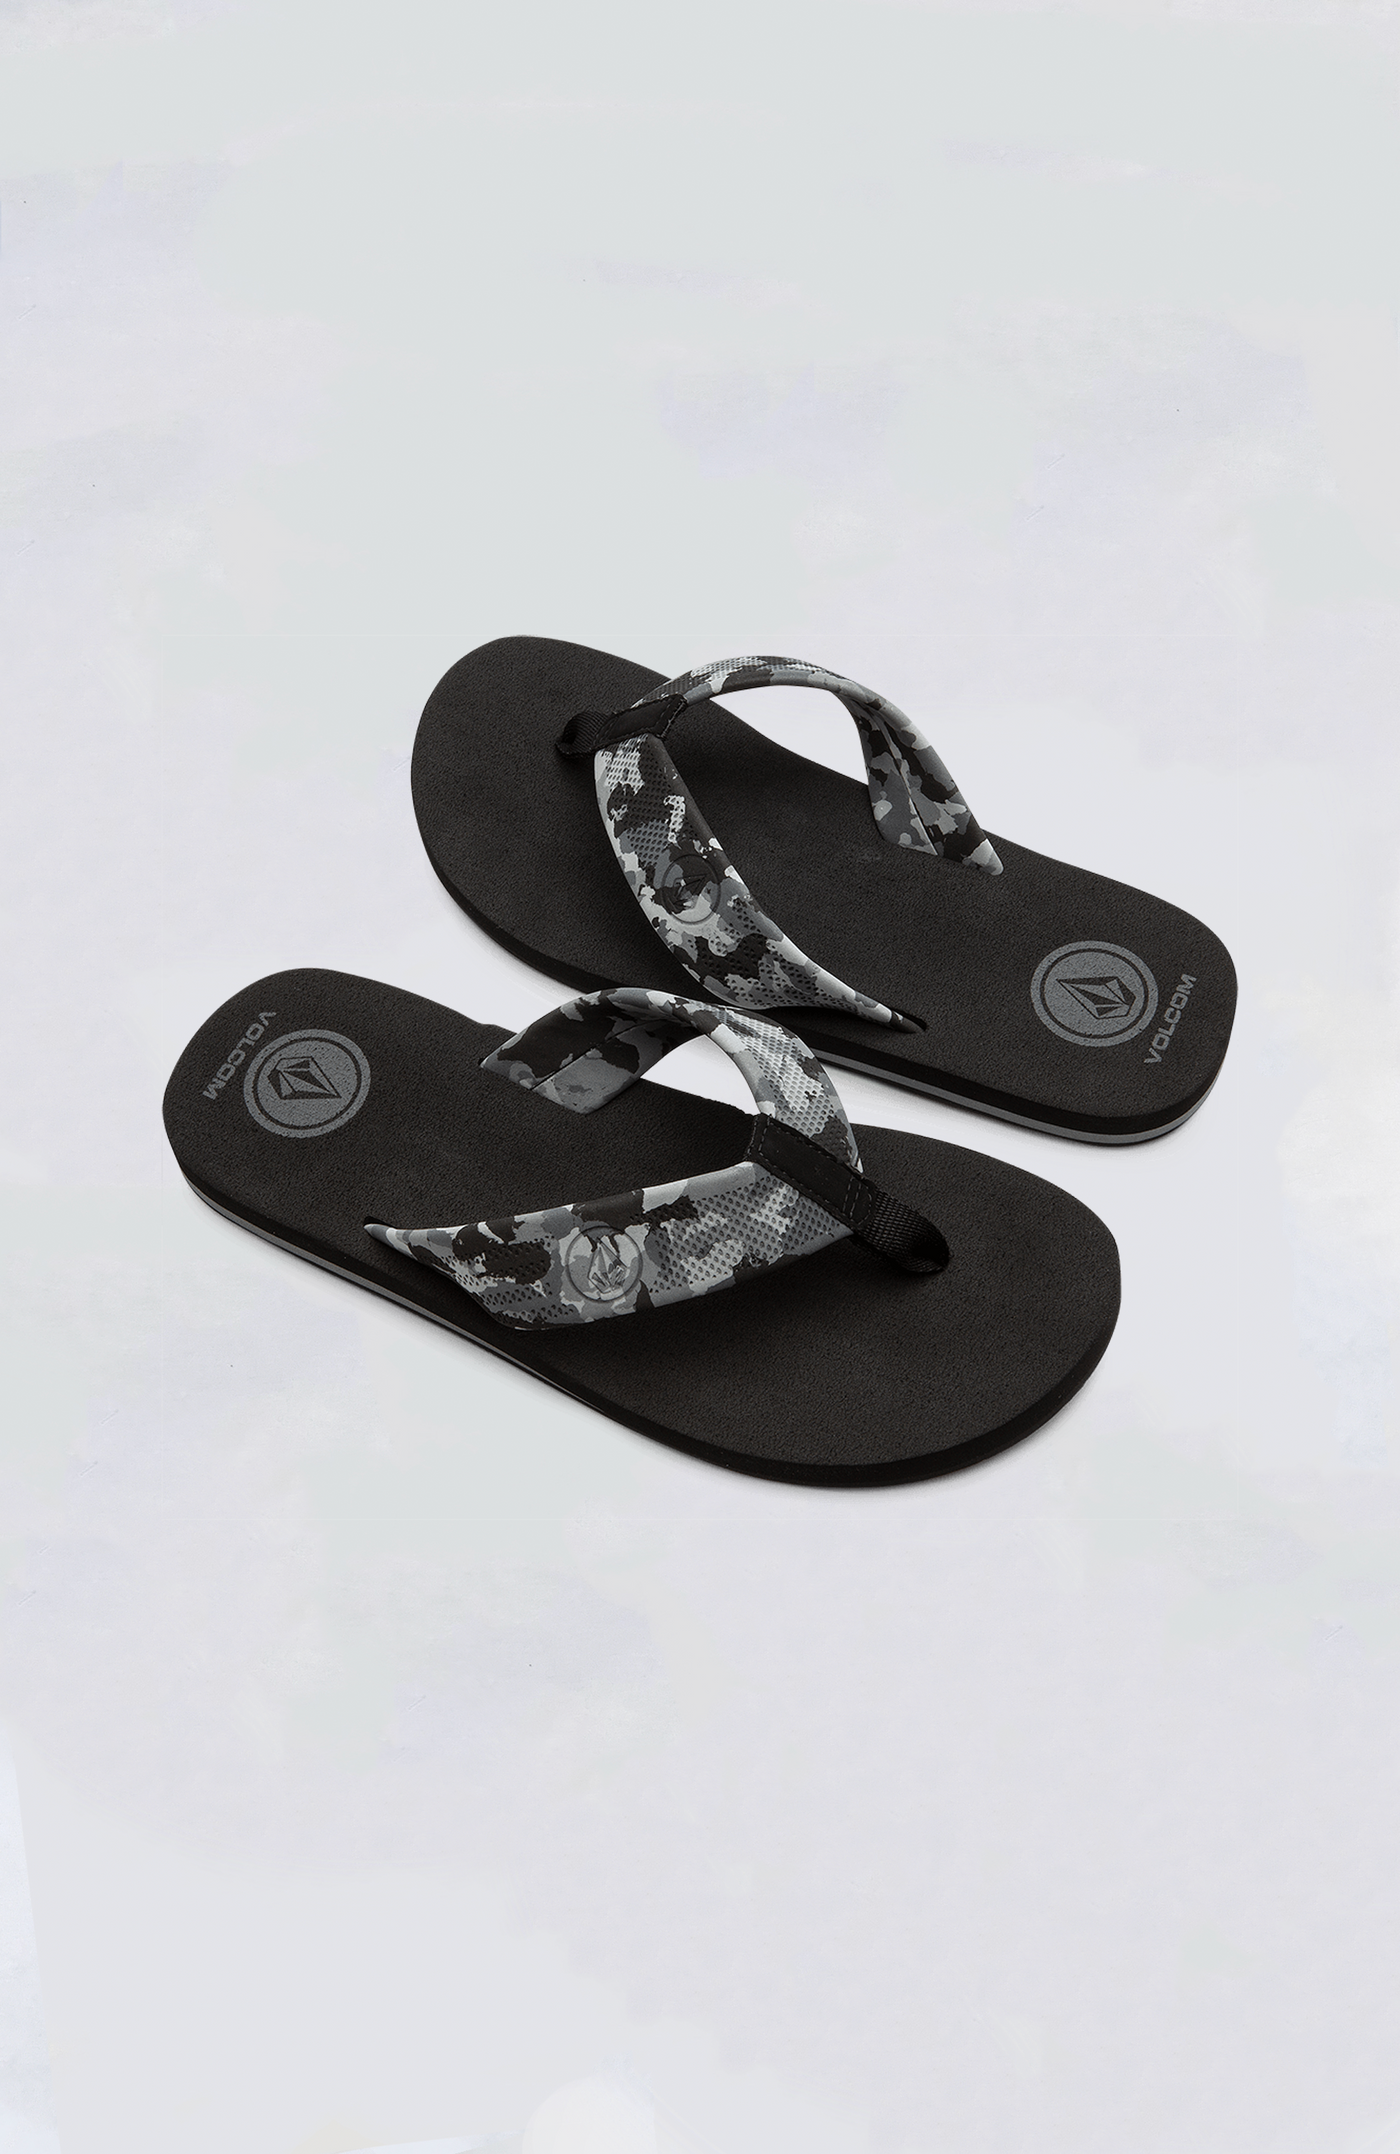 Volcom Slippers - Daycation